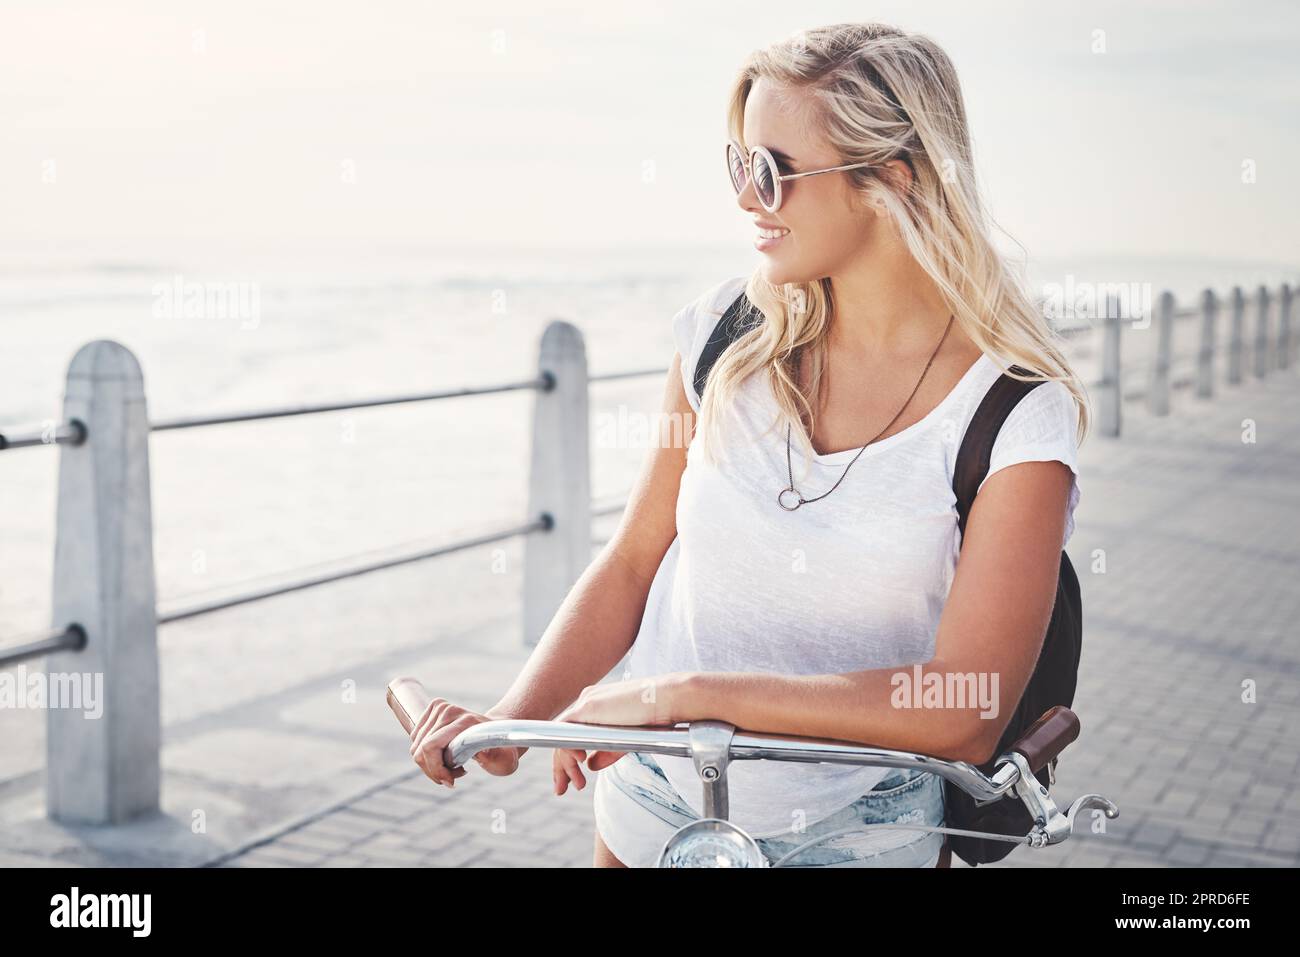 This is my favorite place to be. a beautiful young woman out on the promenade with her bicycle. Stock Photo